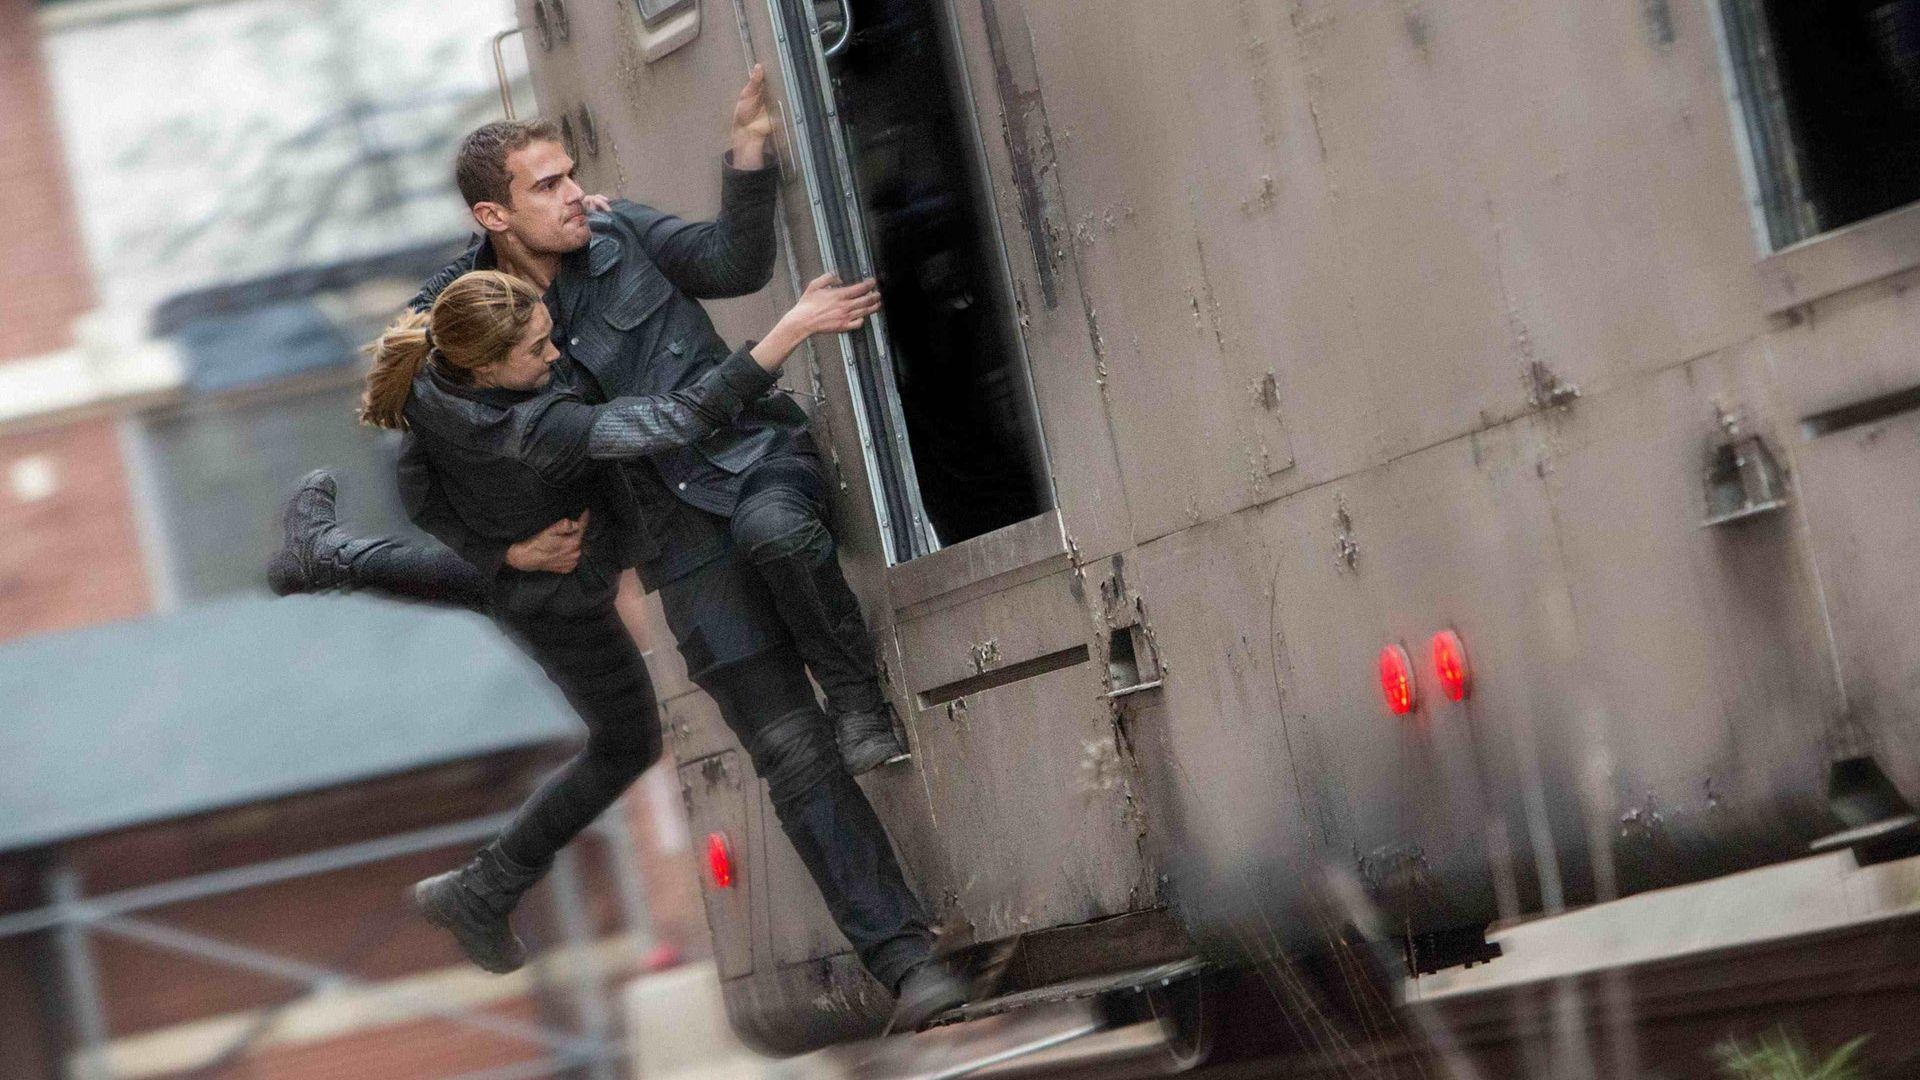 Four and Tris, Divergent movie, Wallpapers, Movie adaptation, 1920x1080 Full HD Desktop